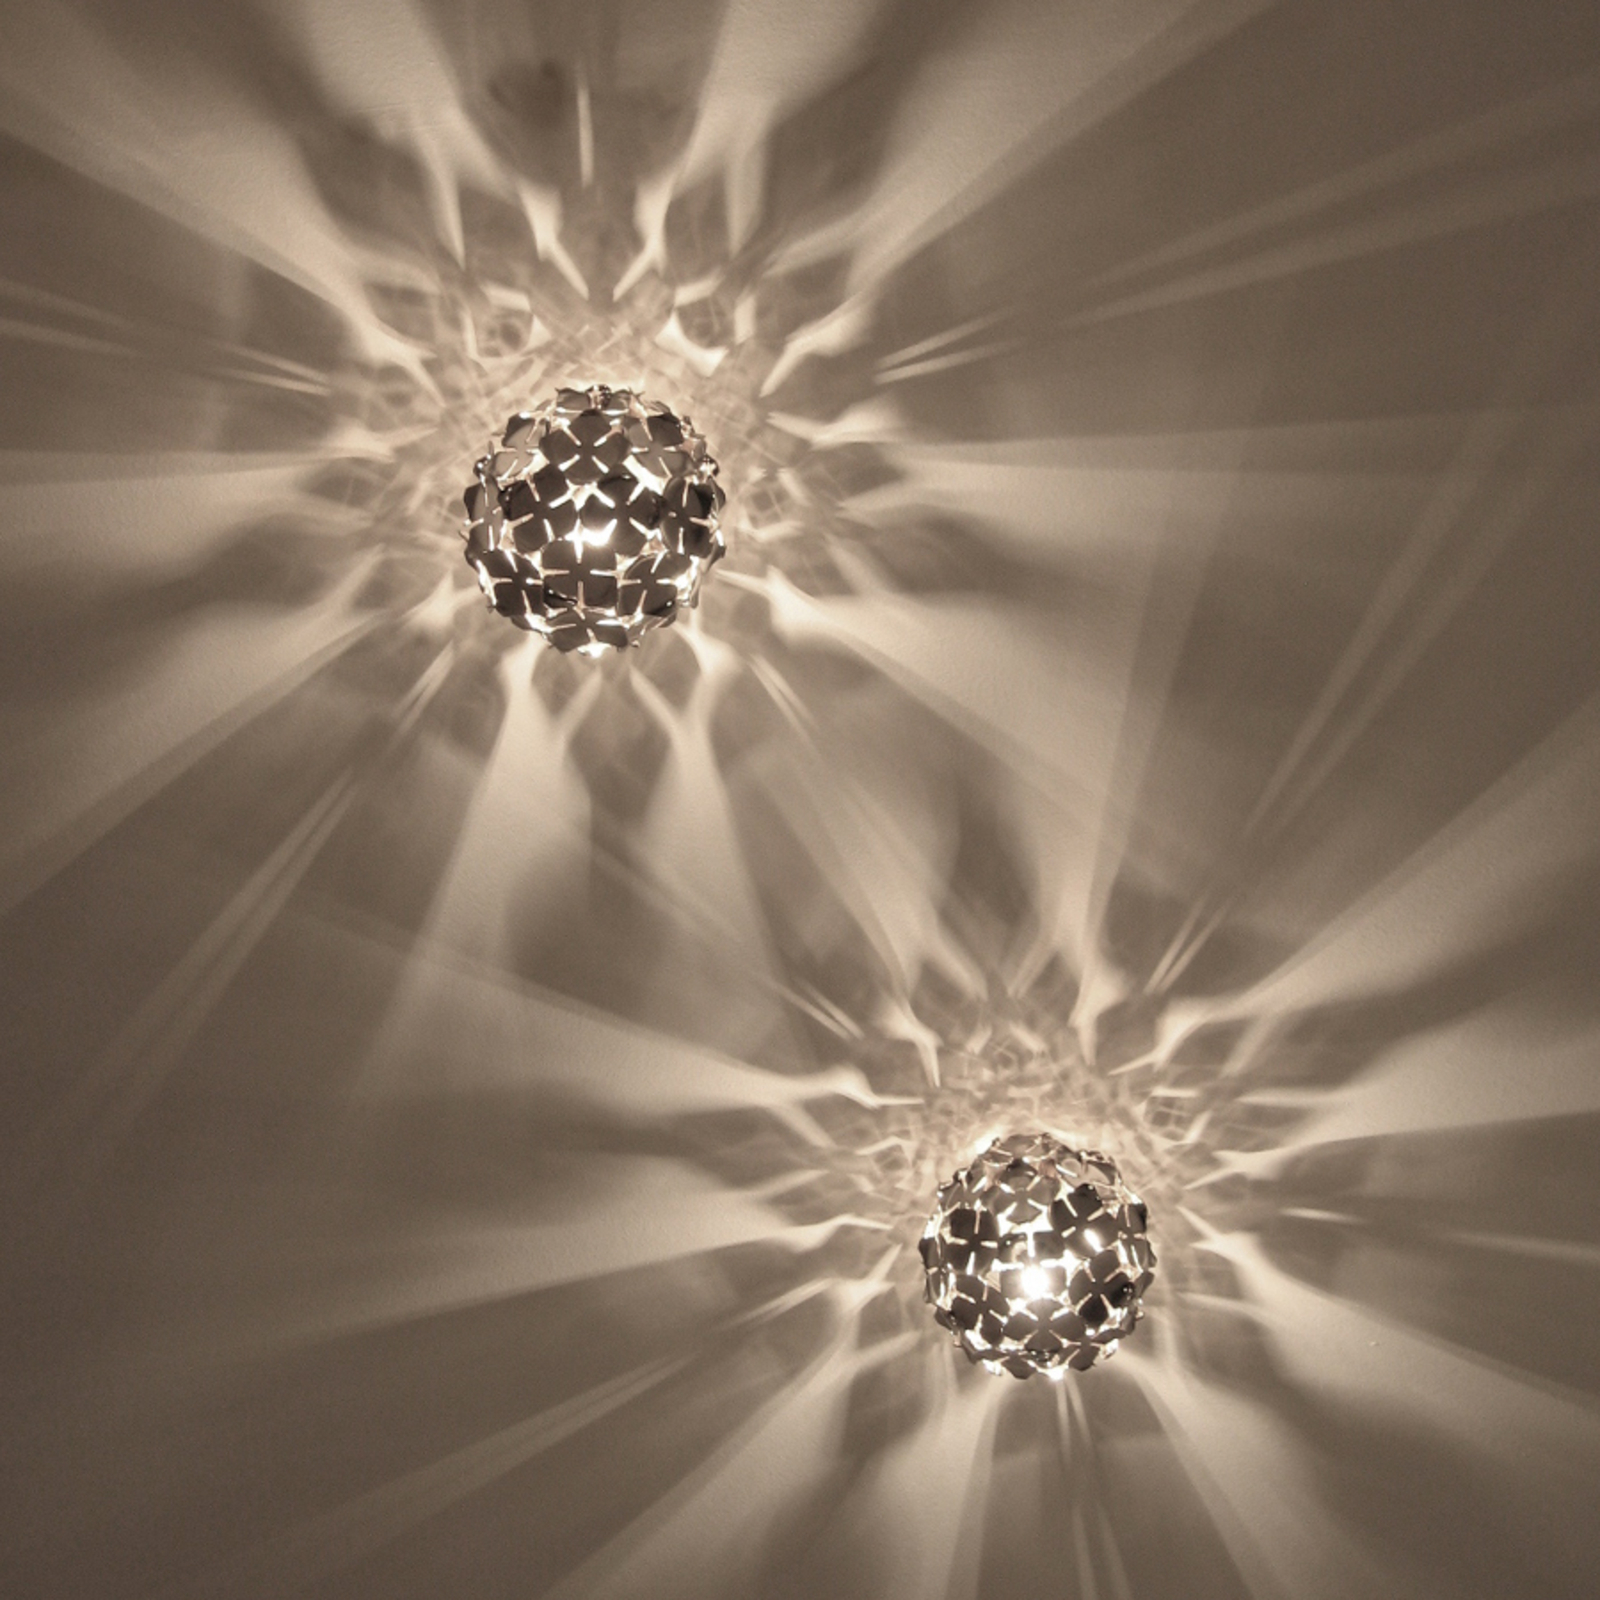 Ortenzia ceiling light with floral design